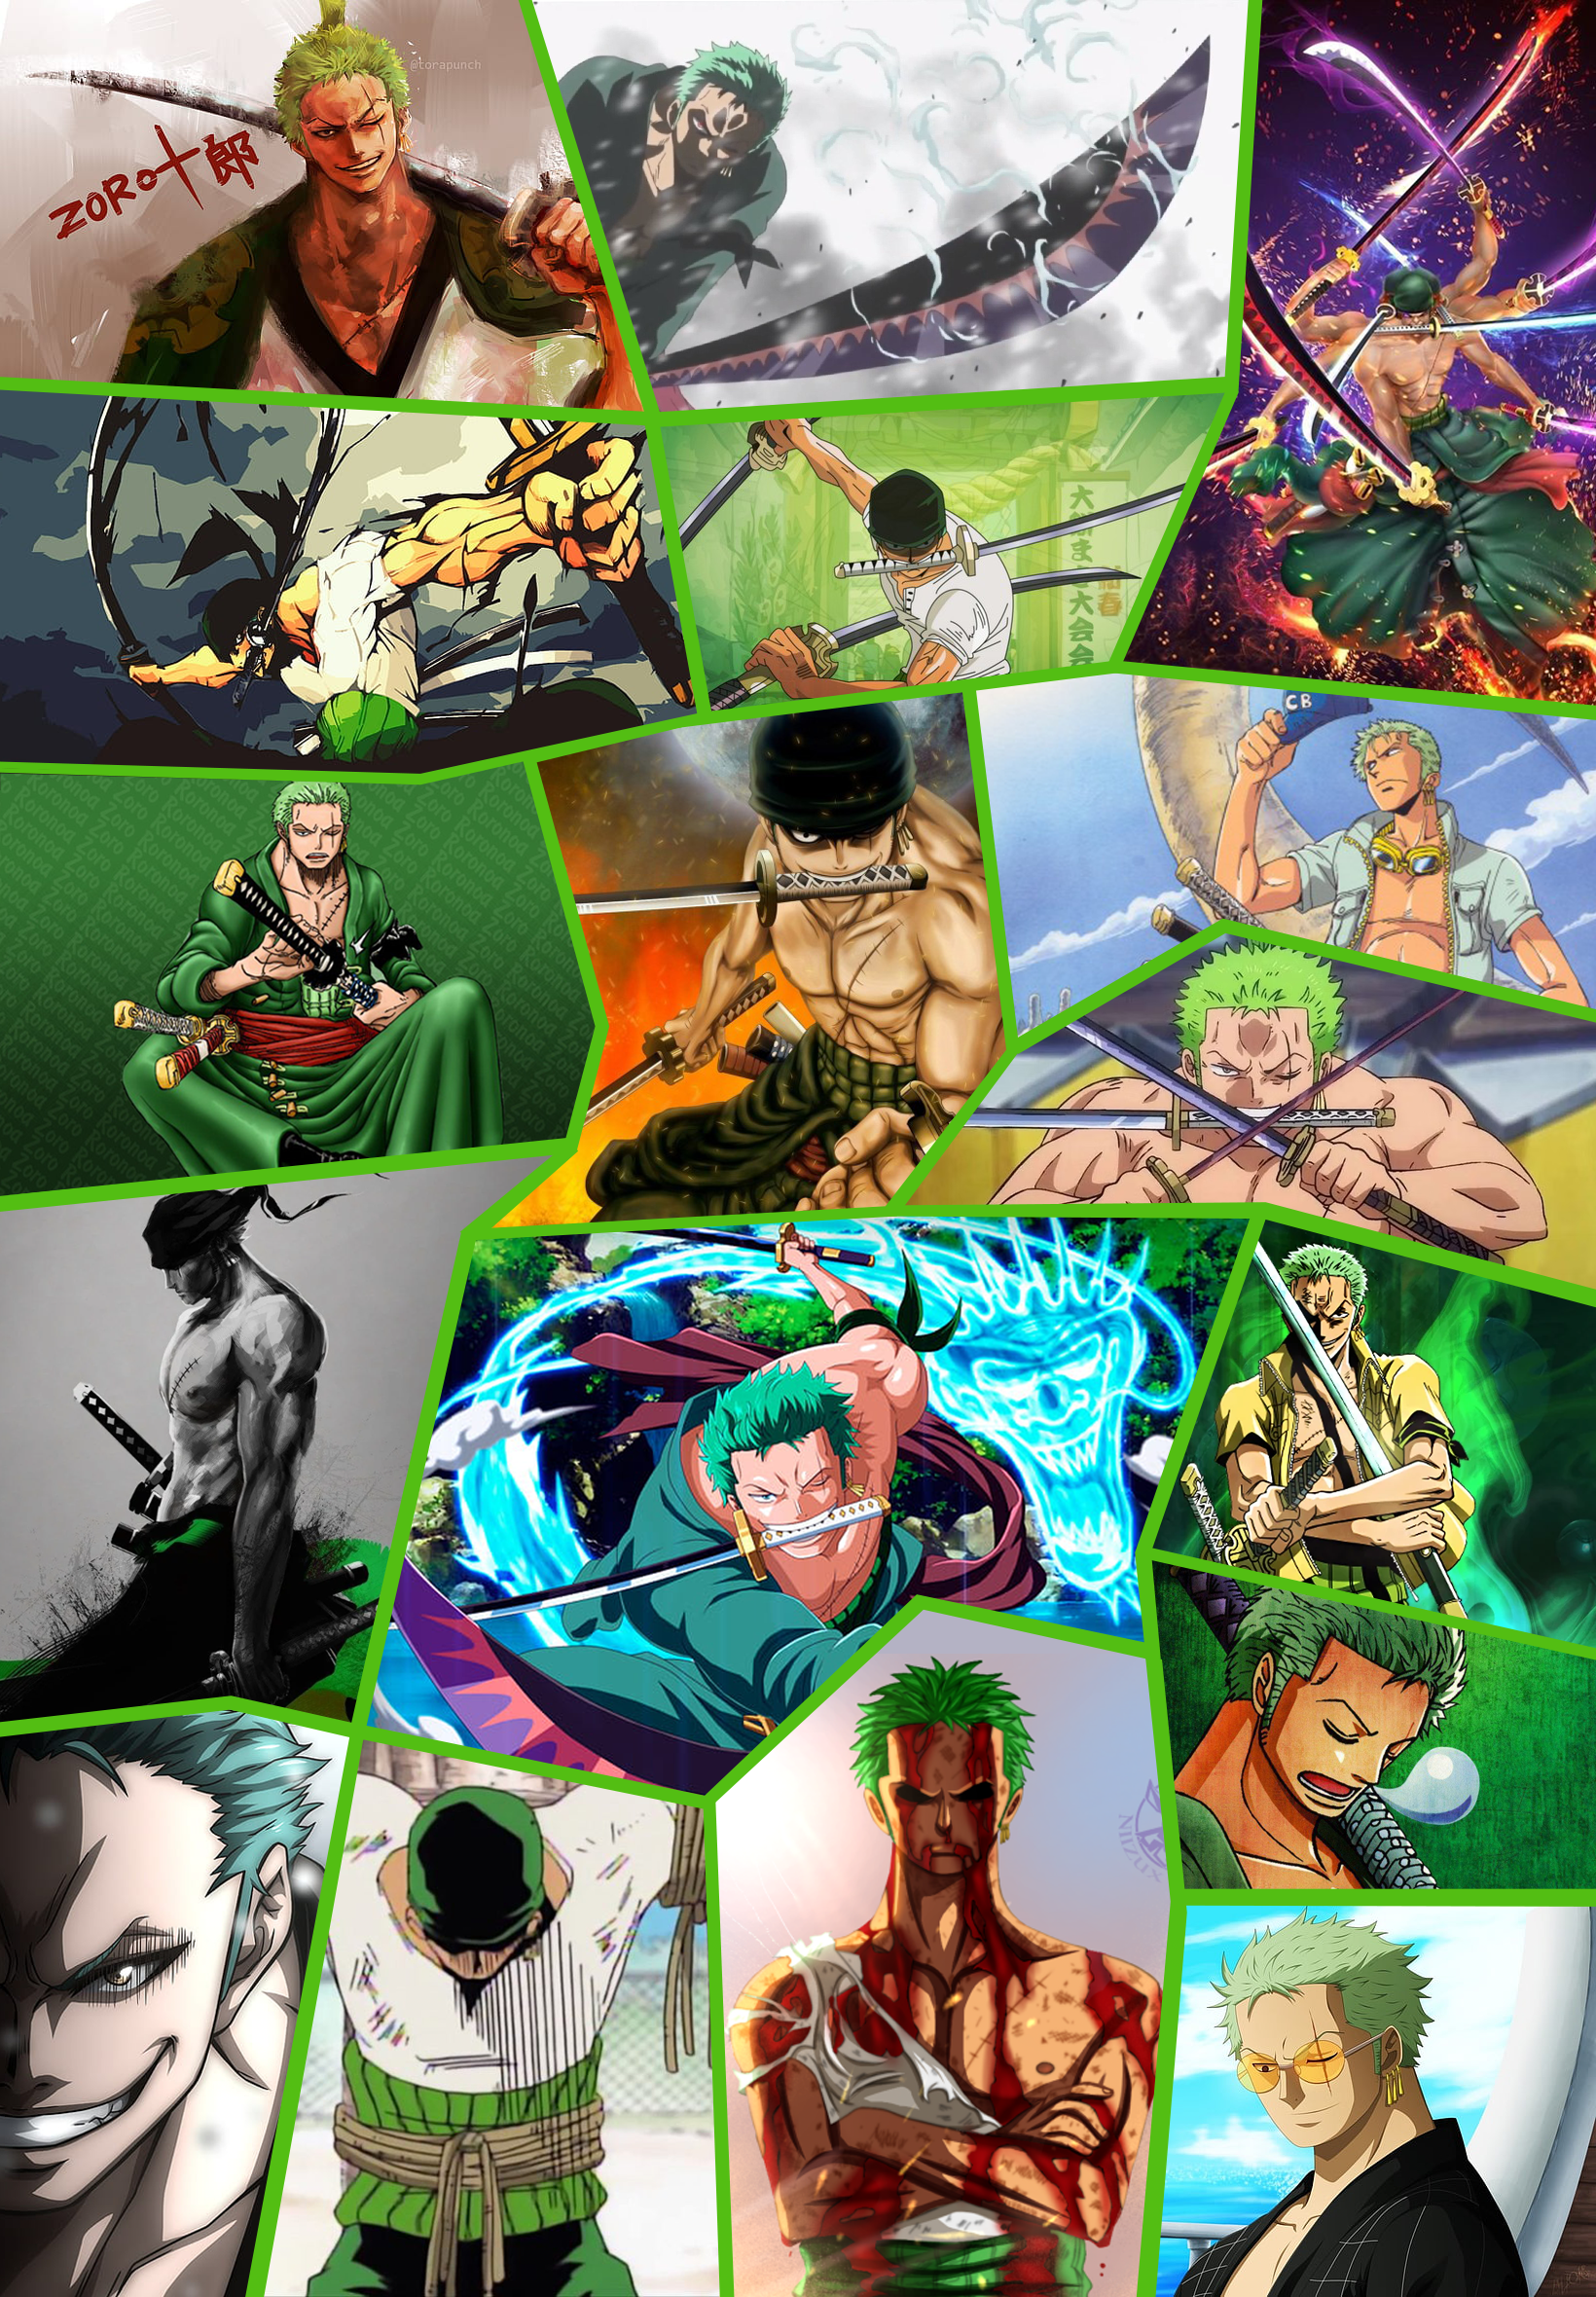 Here is a Zoro Wallpaper I made. What do you think? (sources in comments)